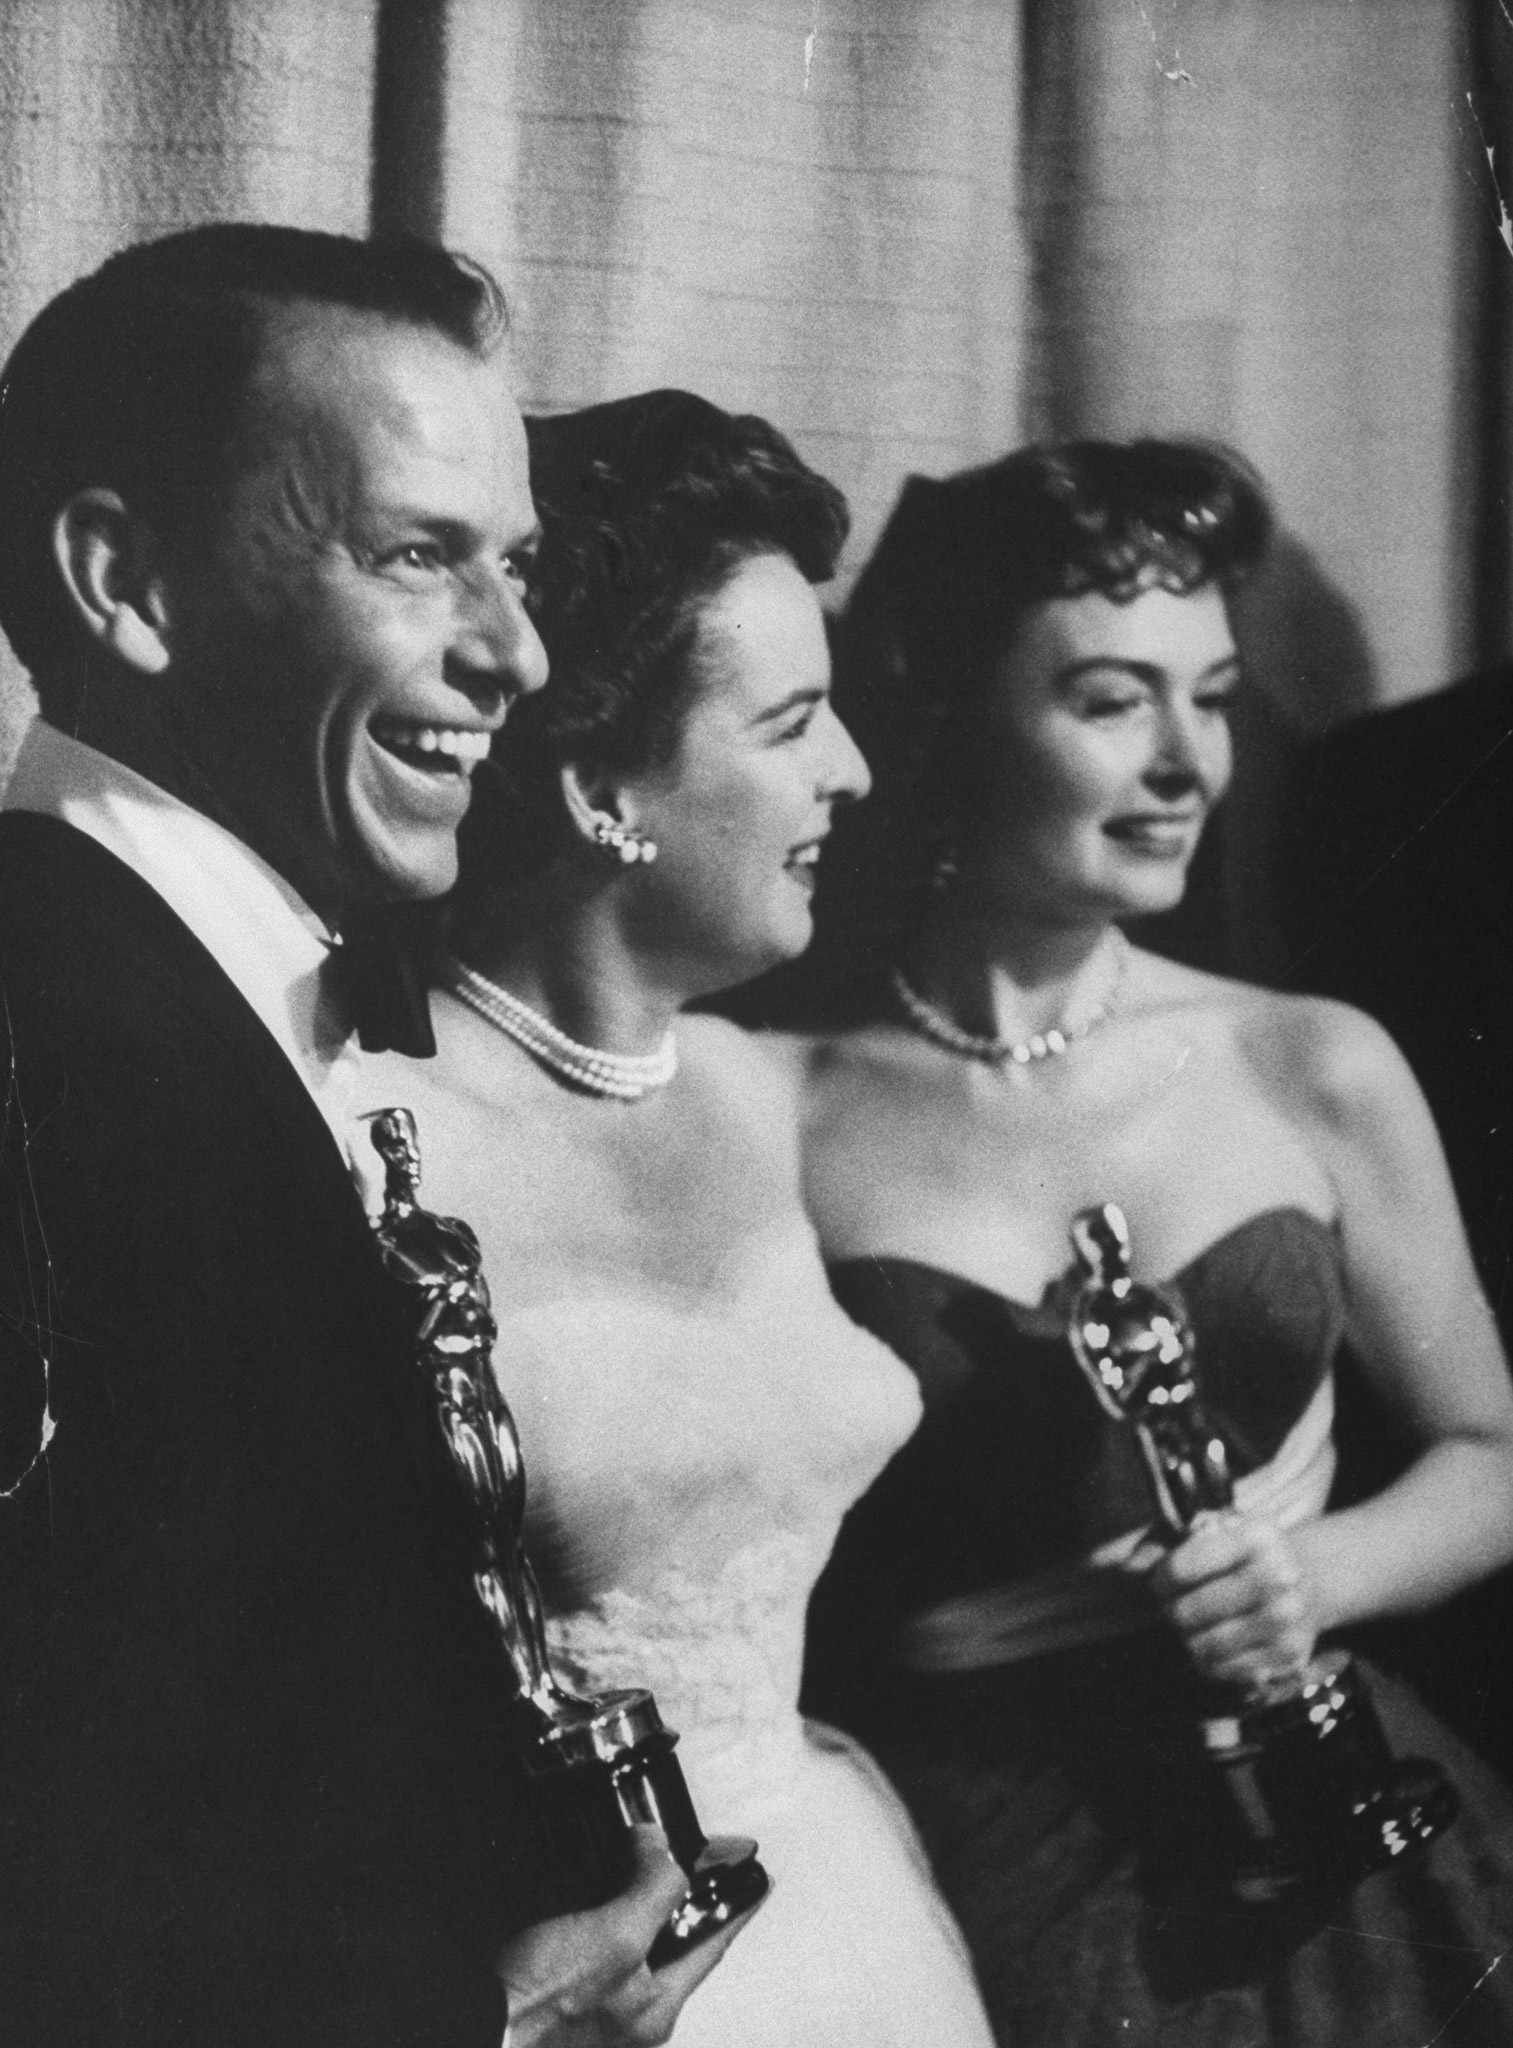 Frank Sinatra and Donna Reed (R) holding Oscars while posing w. presenter, actress Mercedes McCambridge, for Best Supporting Actors in the movie "From Here to Eternity" at the 26th Annual Academy Awards Ceremony, 1954.